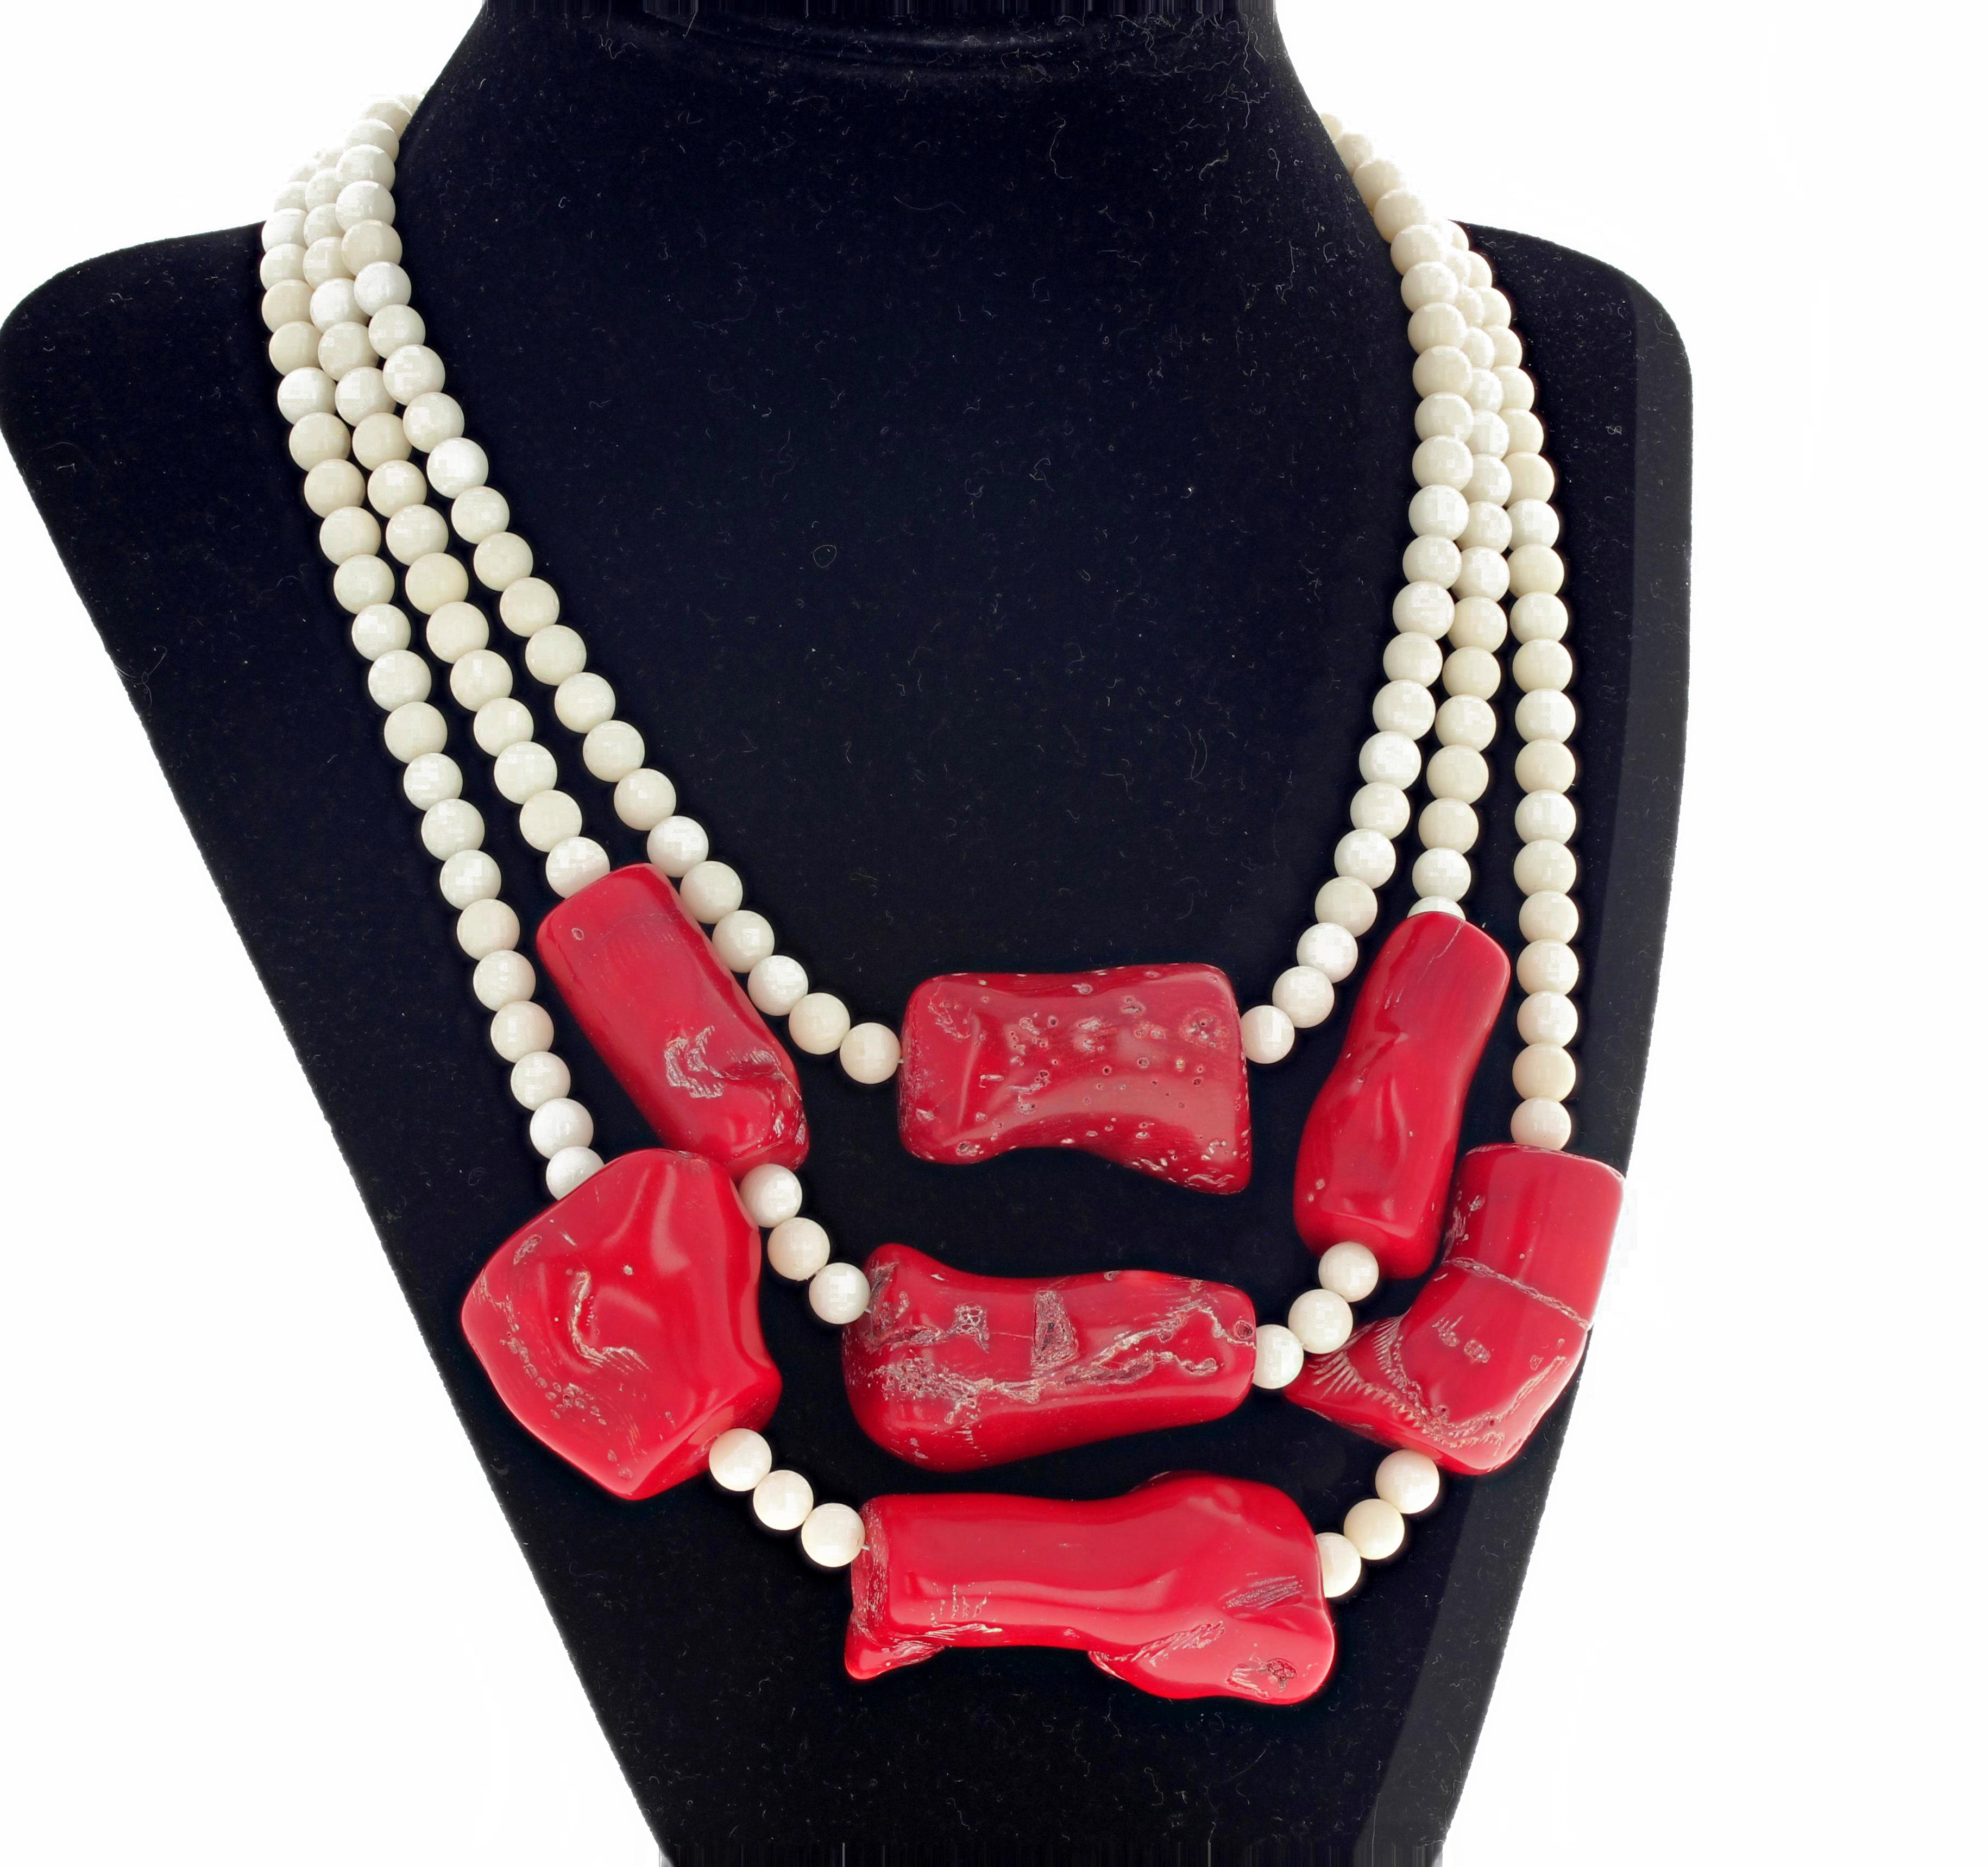 Glamorous statement making triple strand of White Coral enhanced with chunks of highly glowing natural Red Bamboo Coral hangs from 16.25 inches (short strand) to 20 inches (longest strand).  The largest piece is approximately 1 3/4 inches long by 1